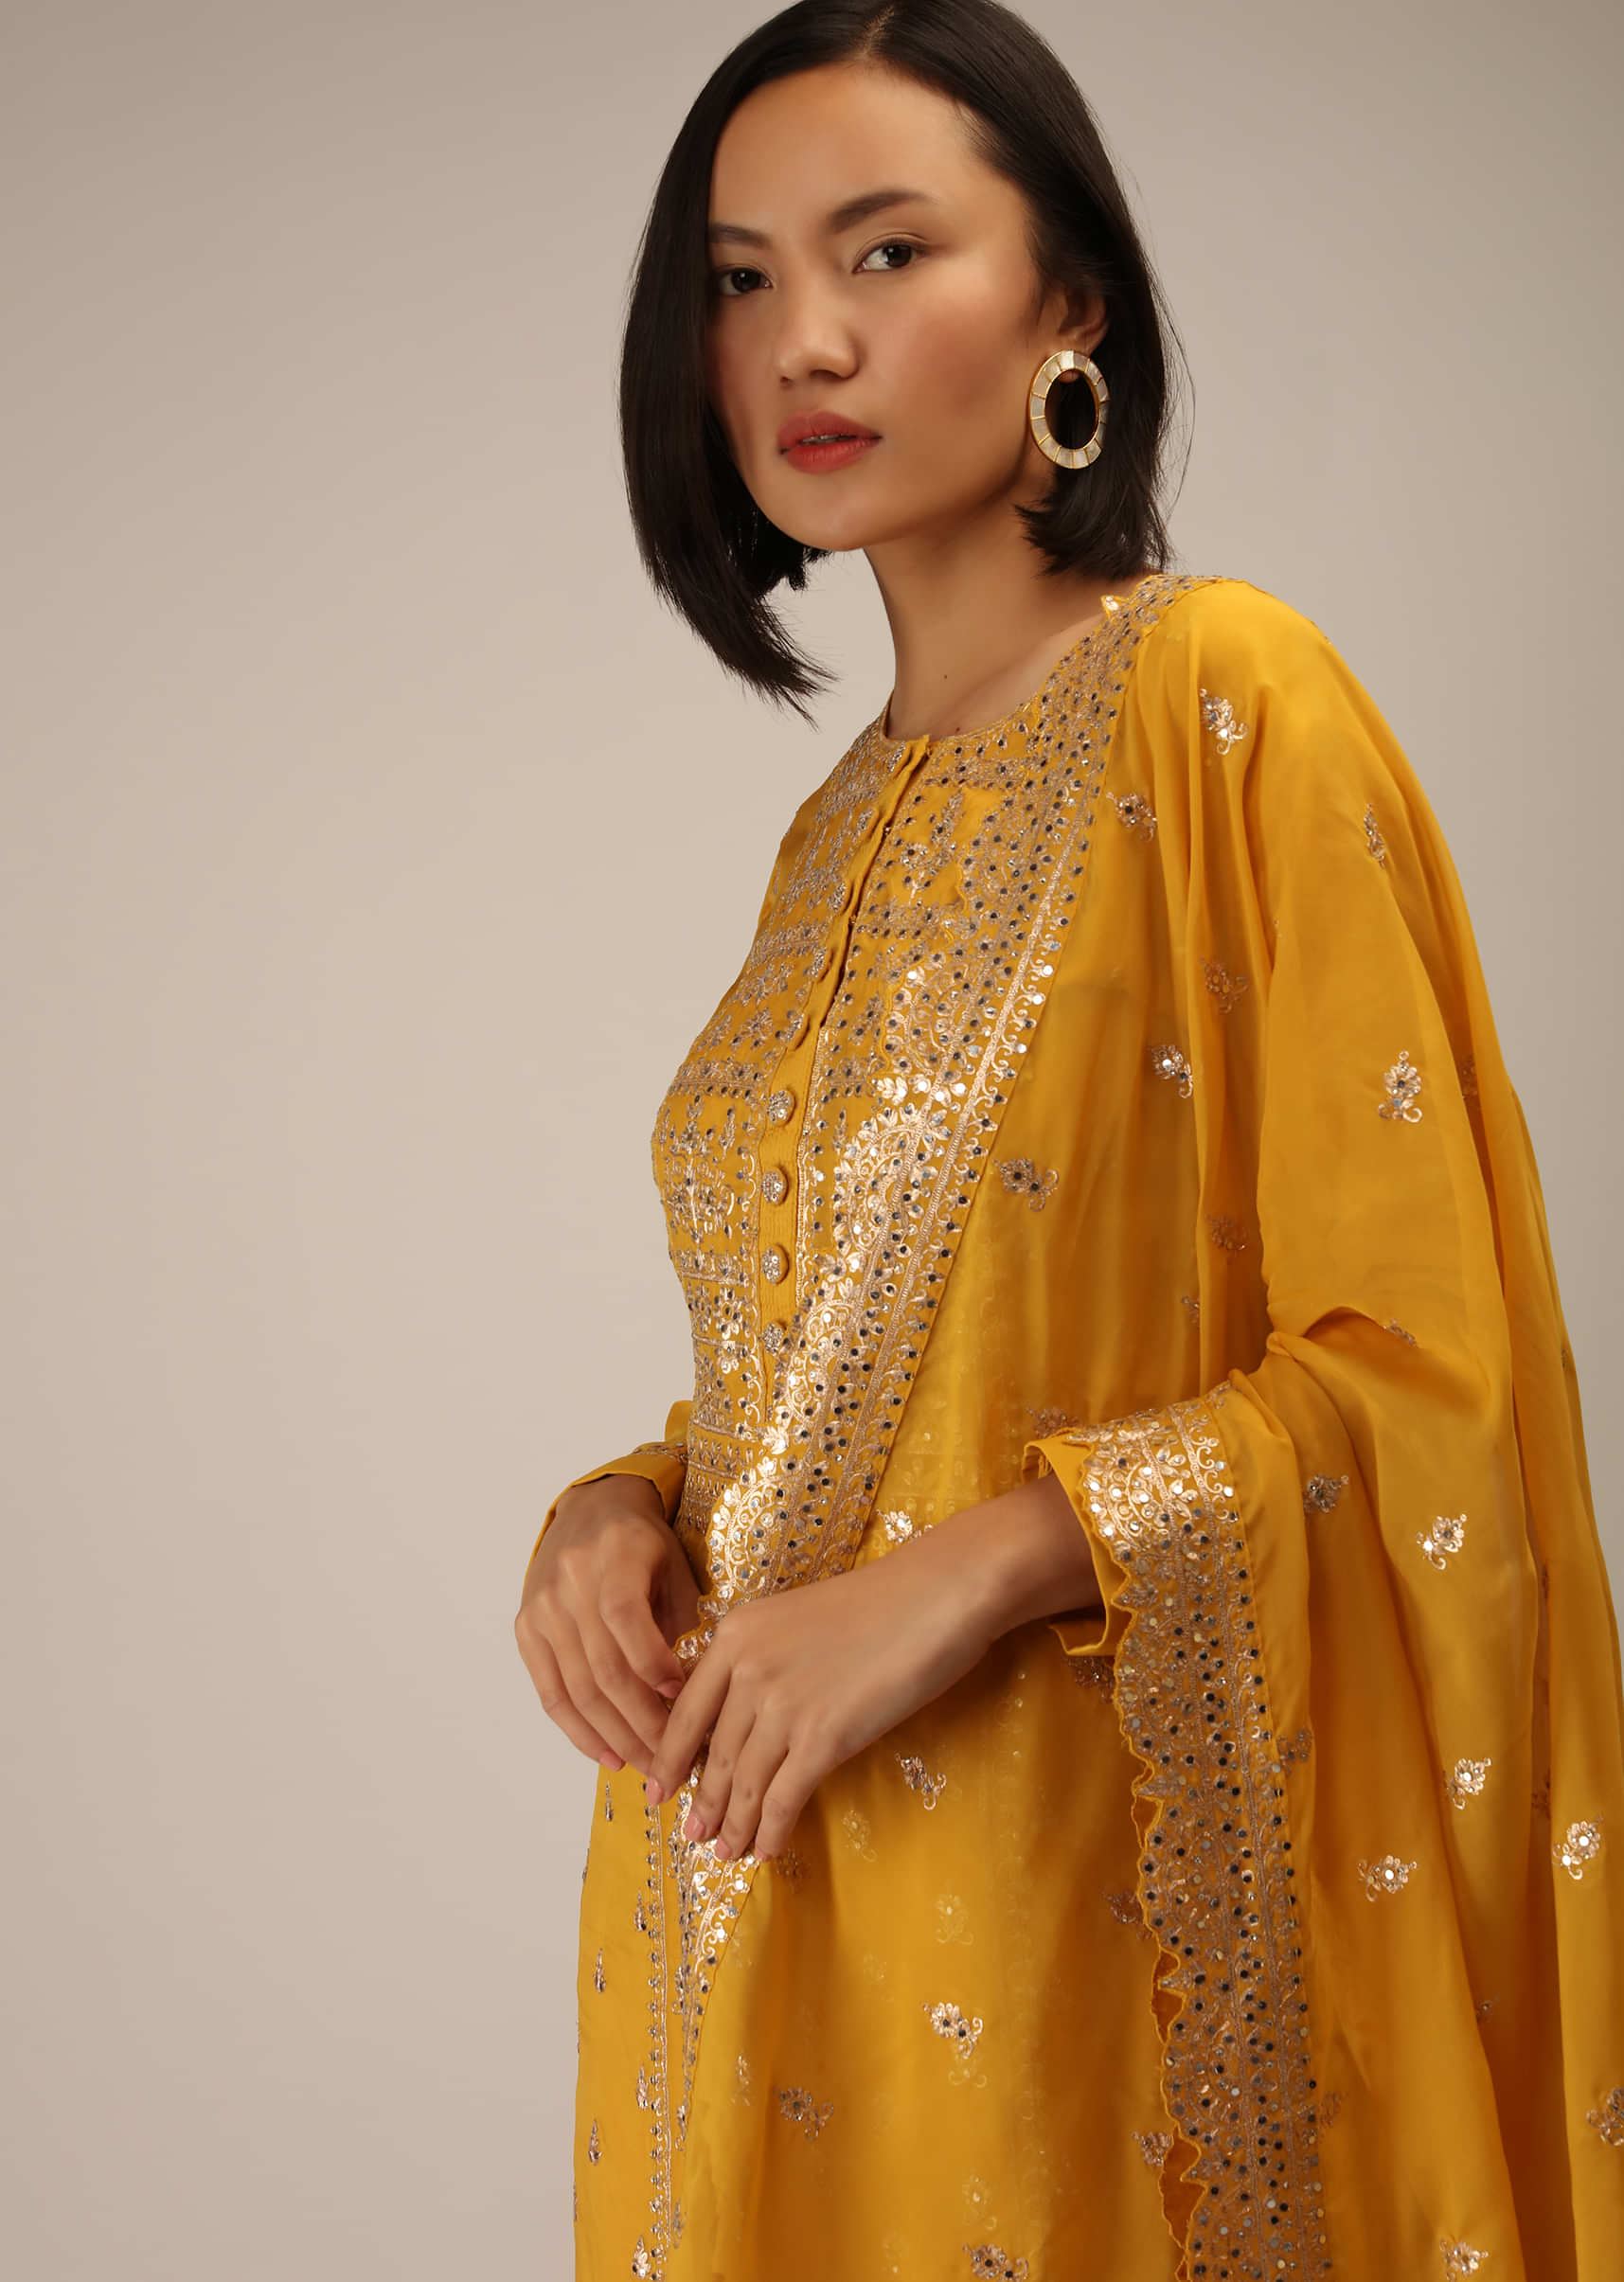 Golden Yellow Straight Cut Suit In Organza Silk With Zari And Mirror Work And Full Sleeves